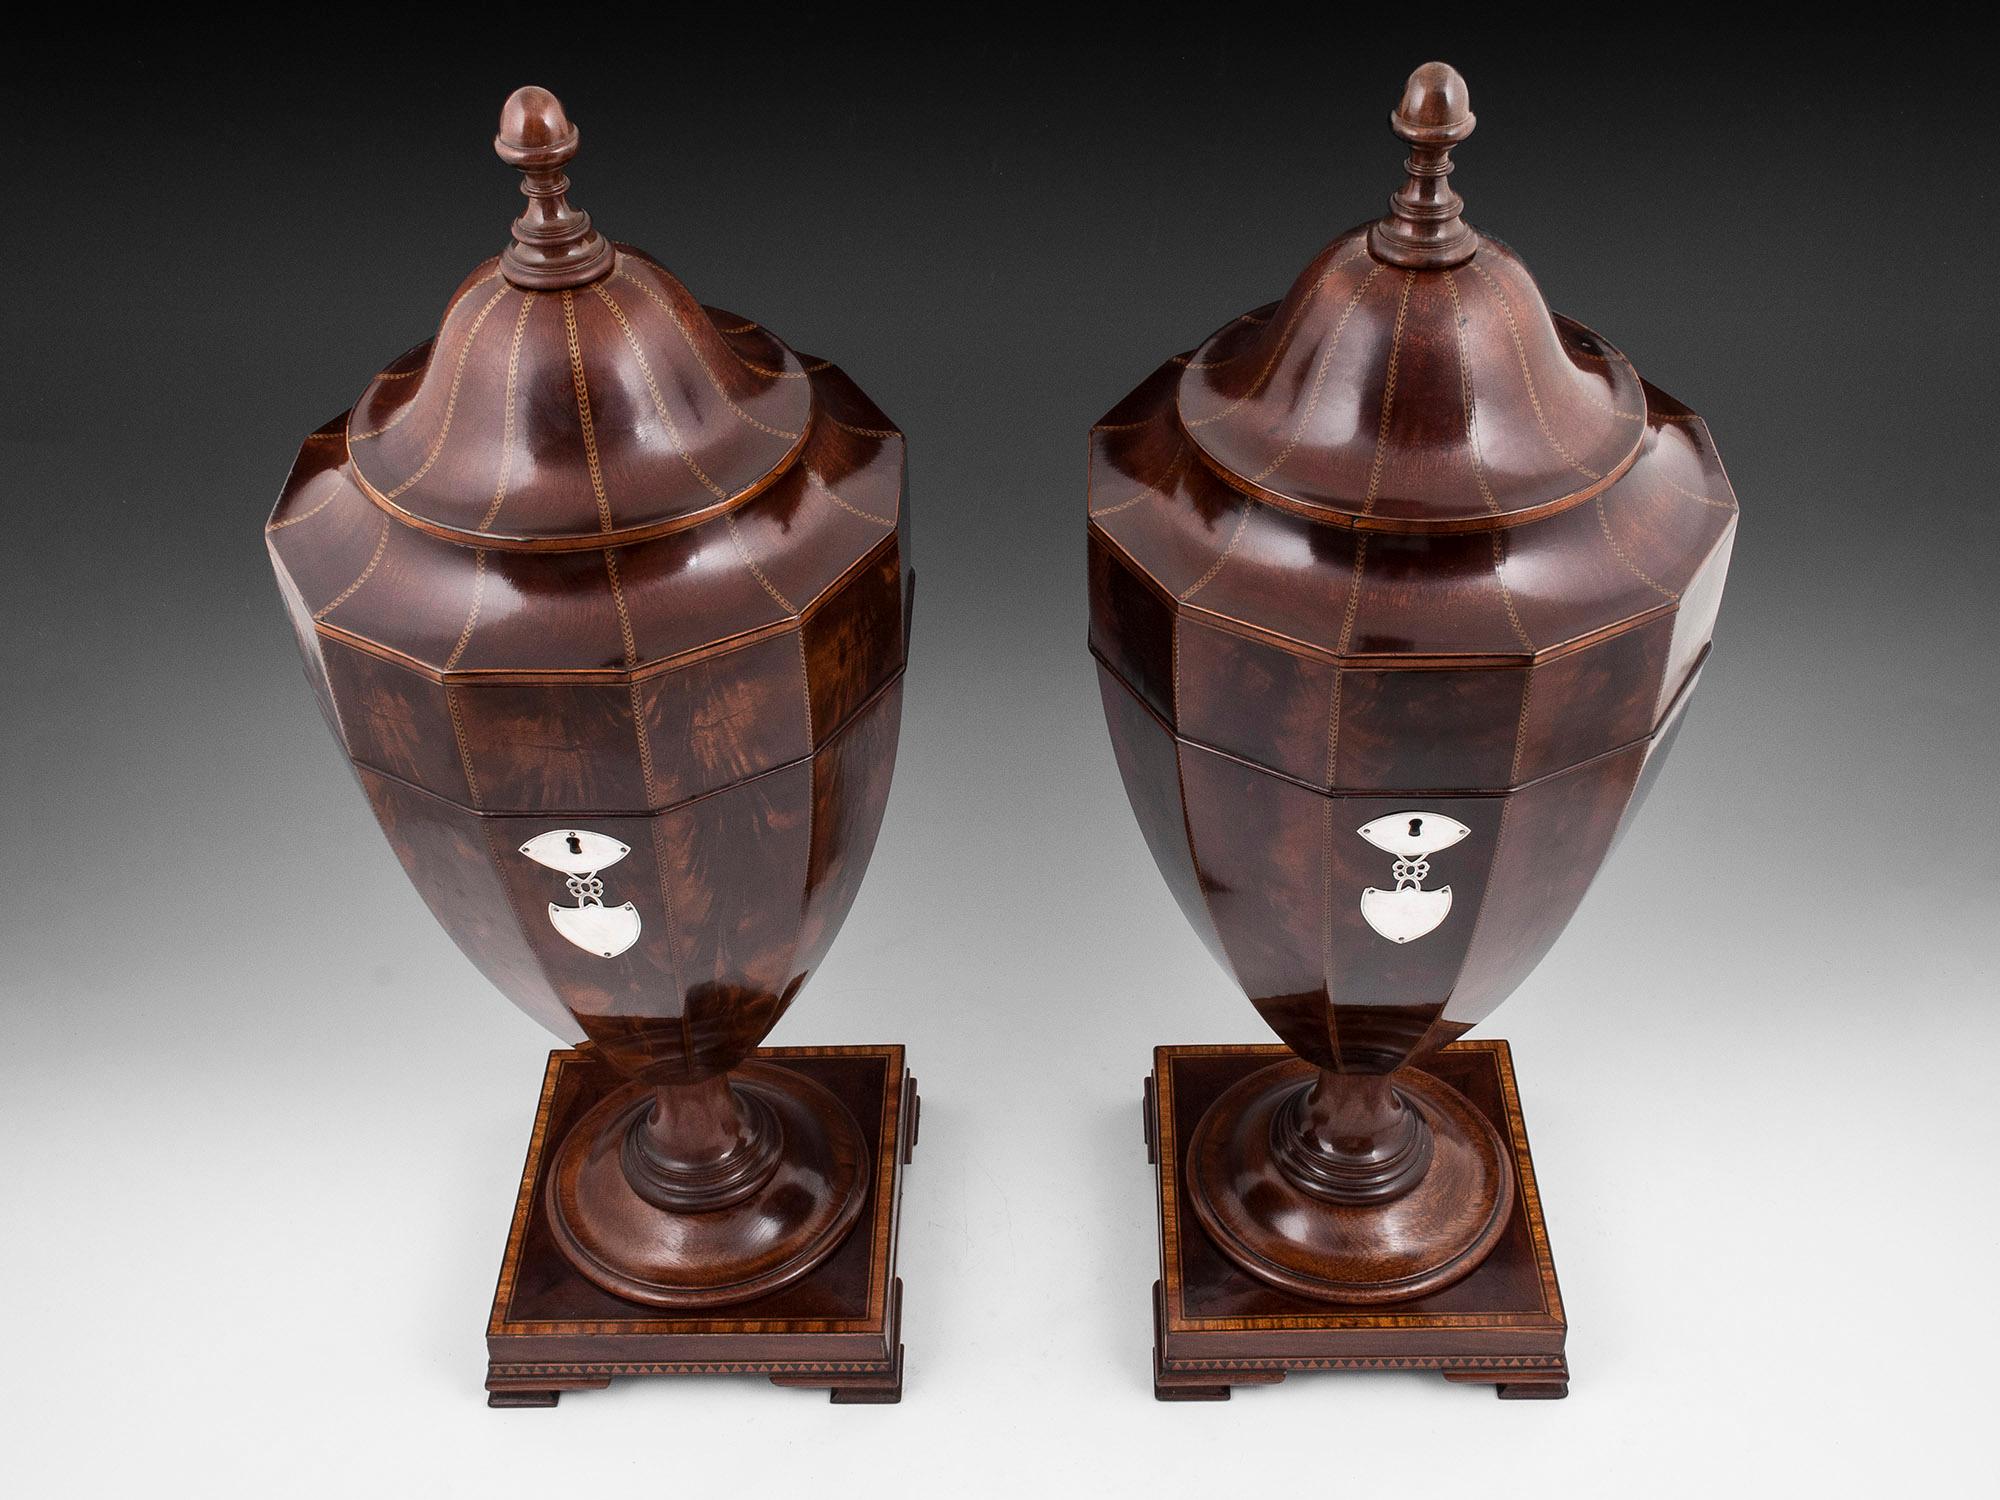 Fine & Rare Pair of Mahogany Spoon Urns 

From our boxes collection, we are delighted to offer this extremely good and rare pair of Georgian cutlery urns. The urns made specifically for spoons are veneered in flame Mahogany separated with